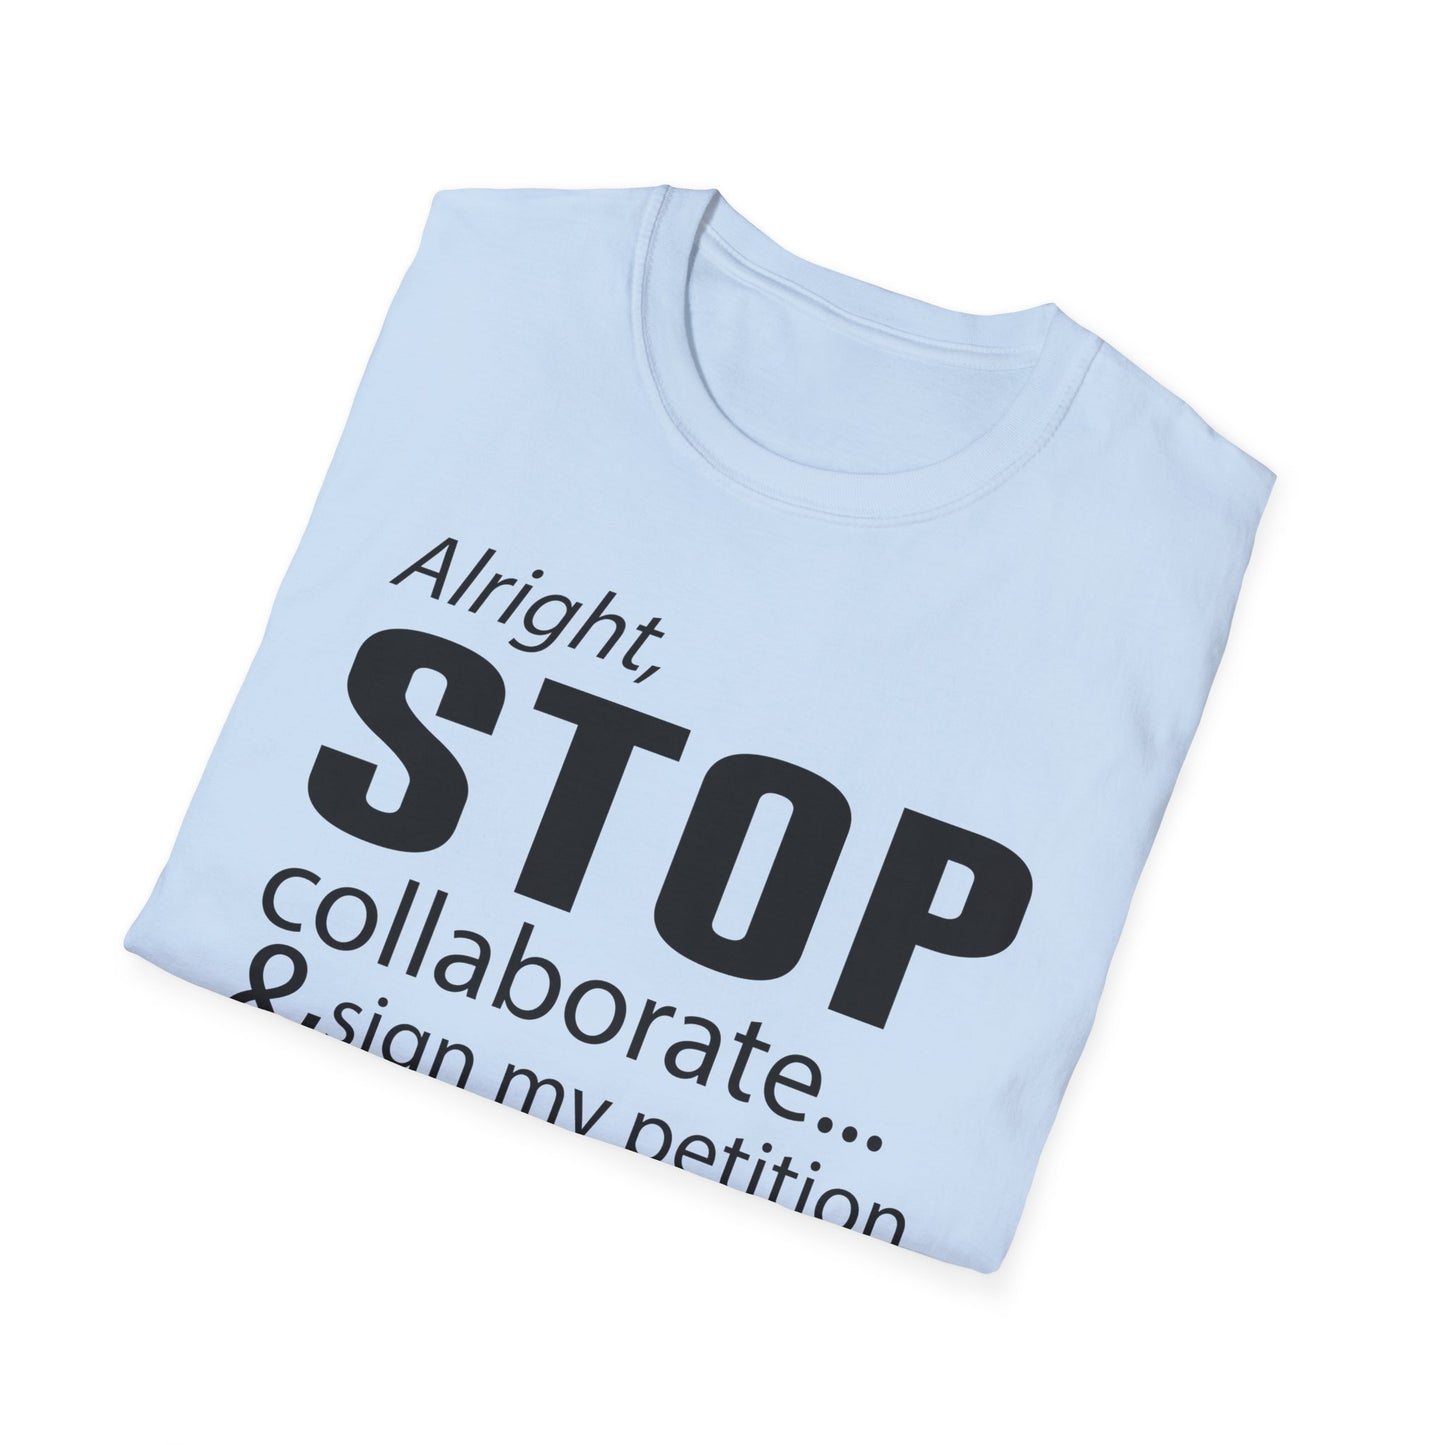 Alright Stop Collaborate and Sign My Petition Shirt, AR Kids Shirt, Funny Quote Shirt, Graphic Tee